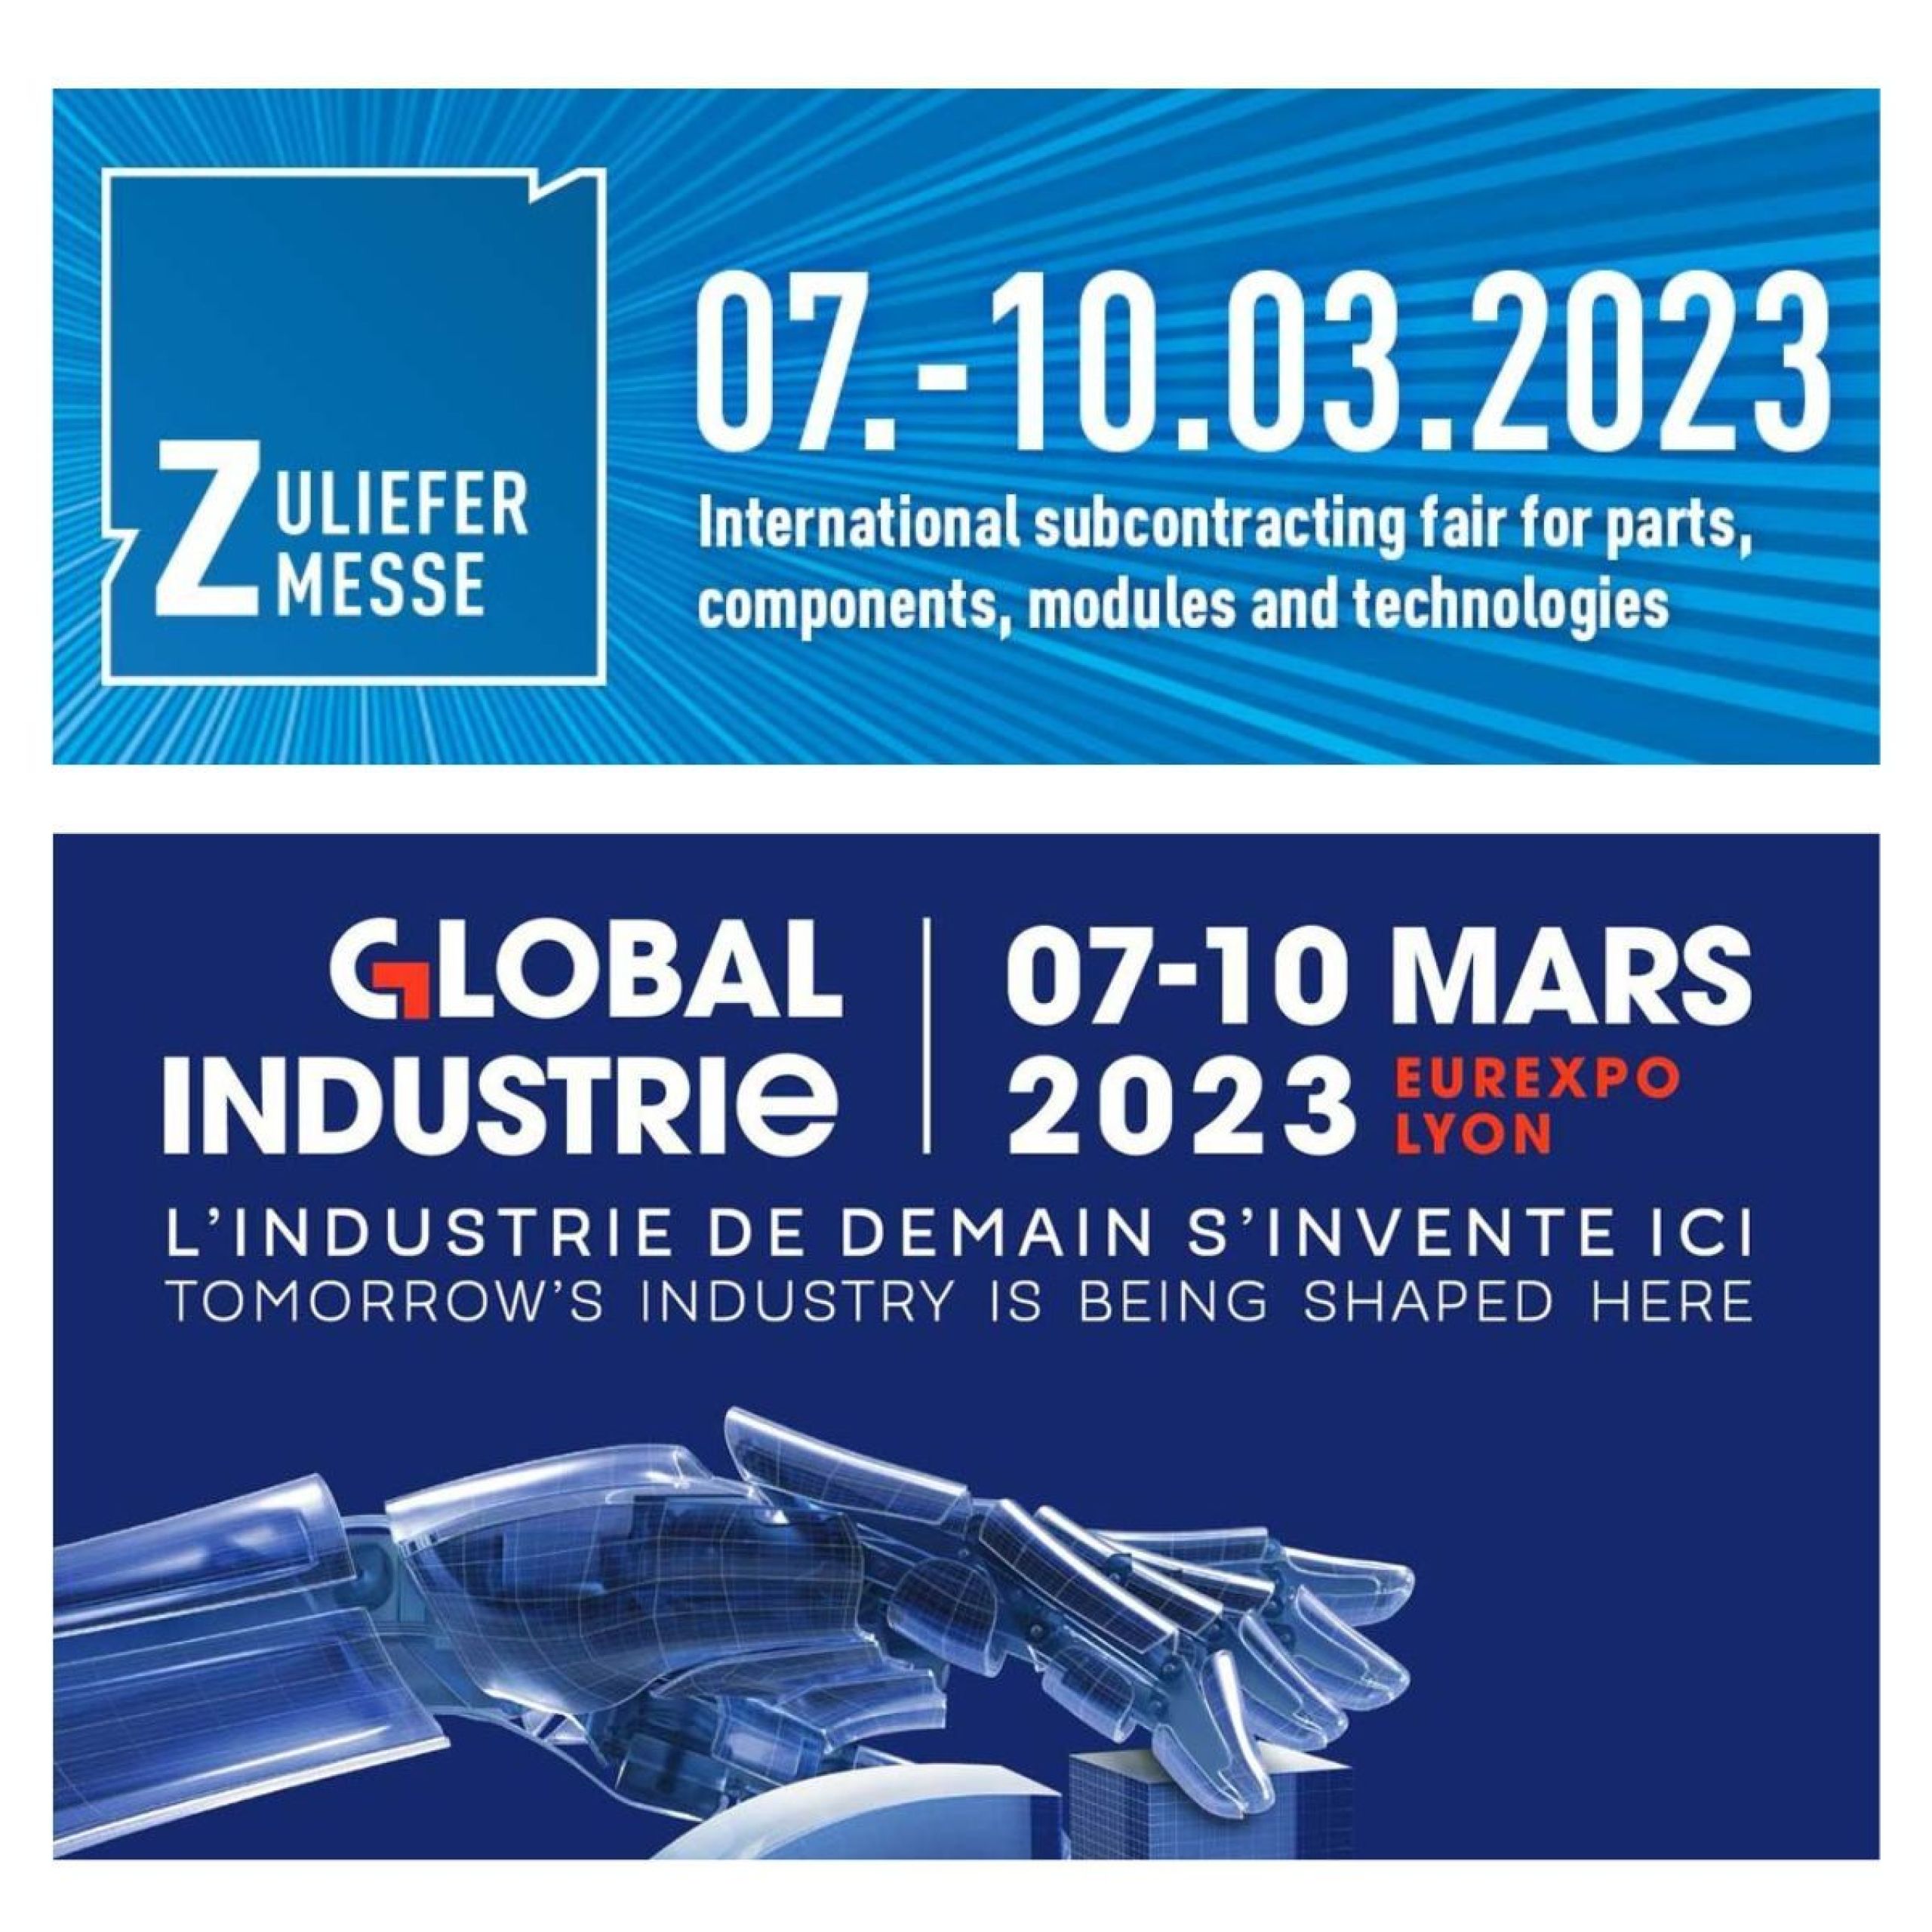 The international subcontracting trade fair ZULIEFER MESSE starts today